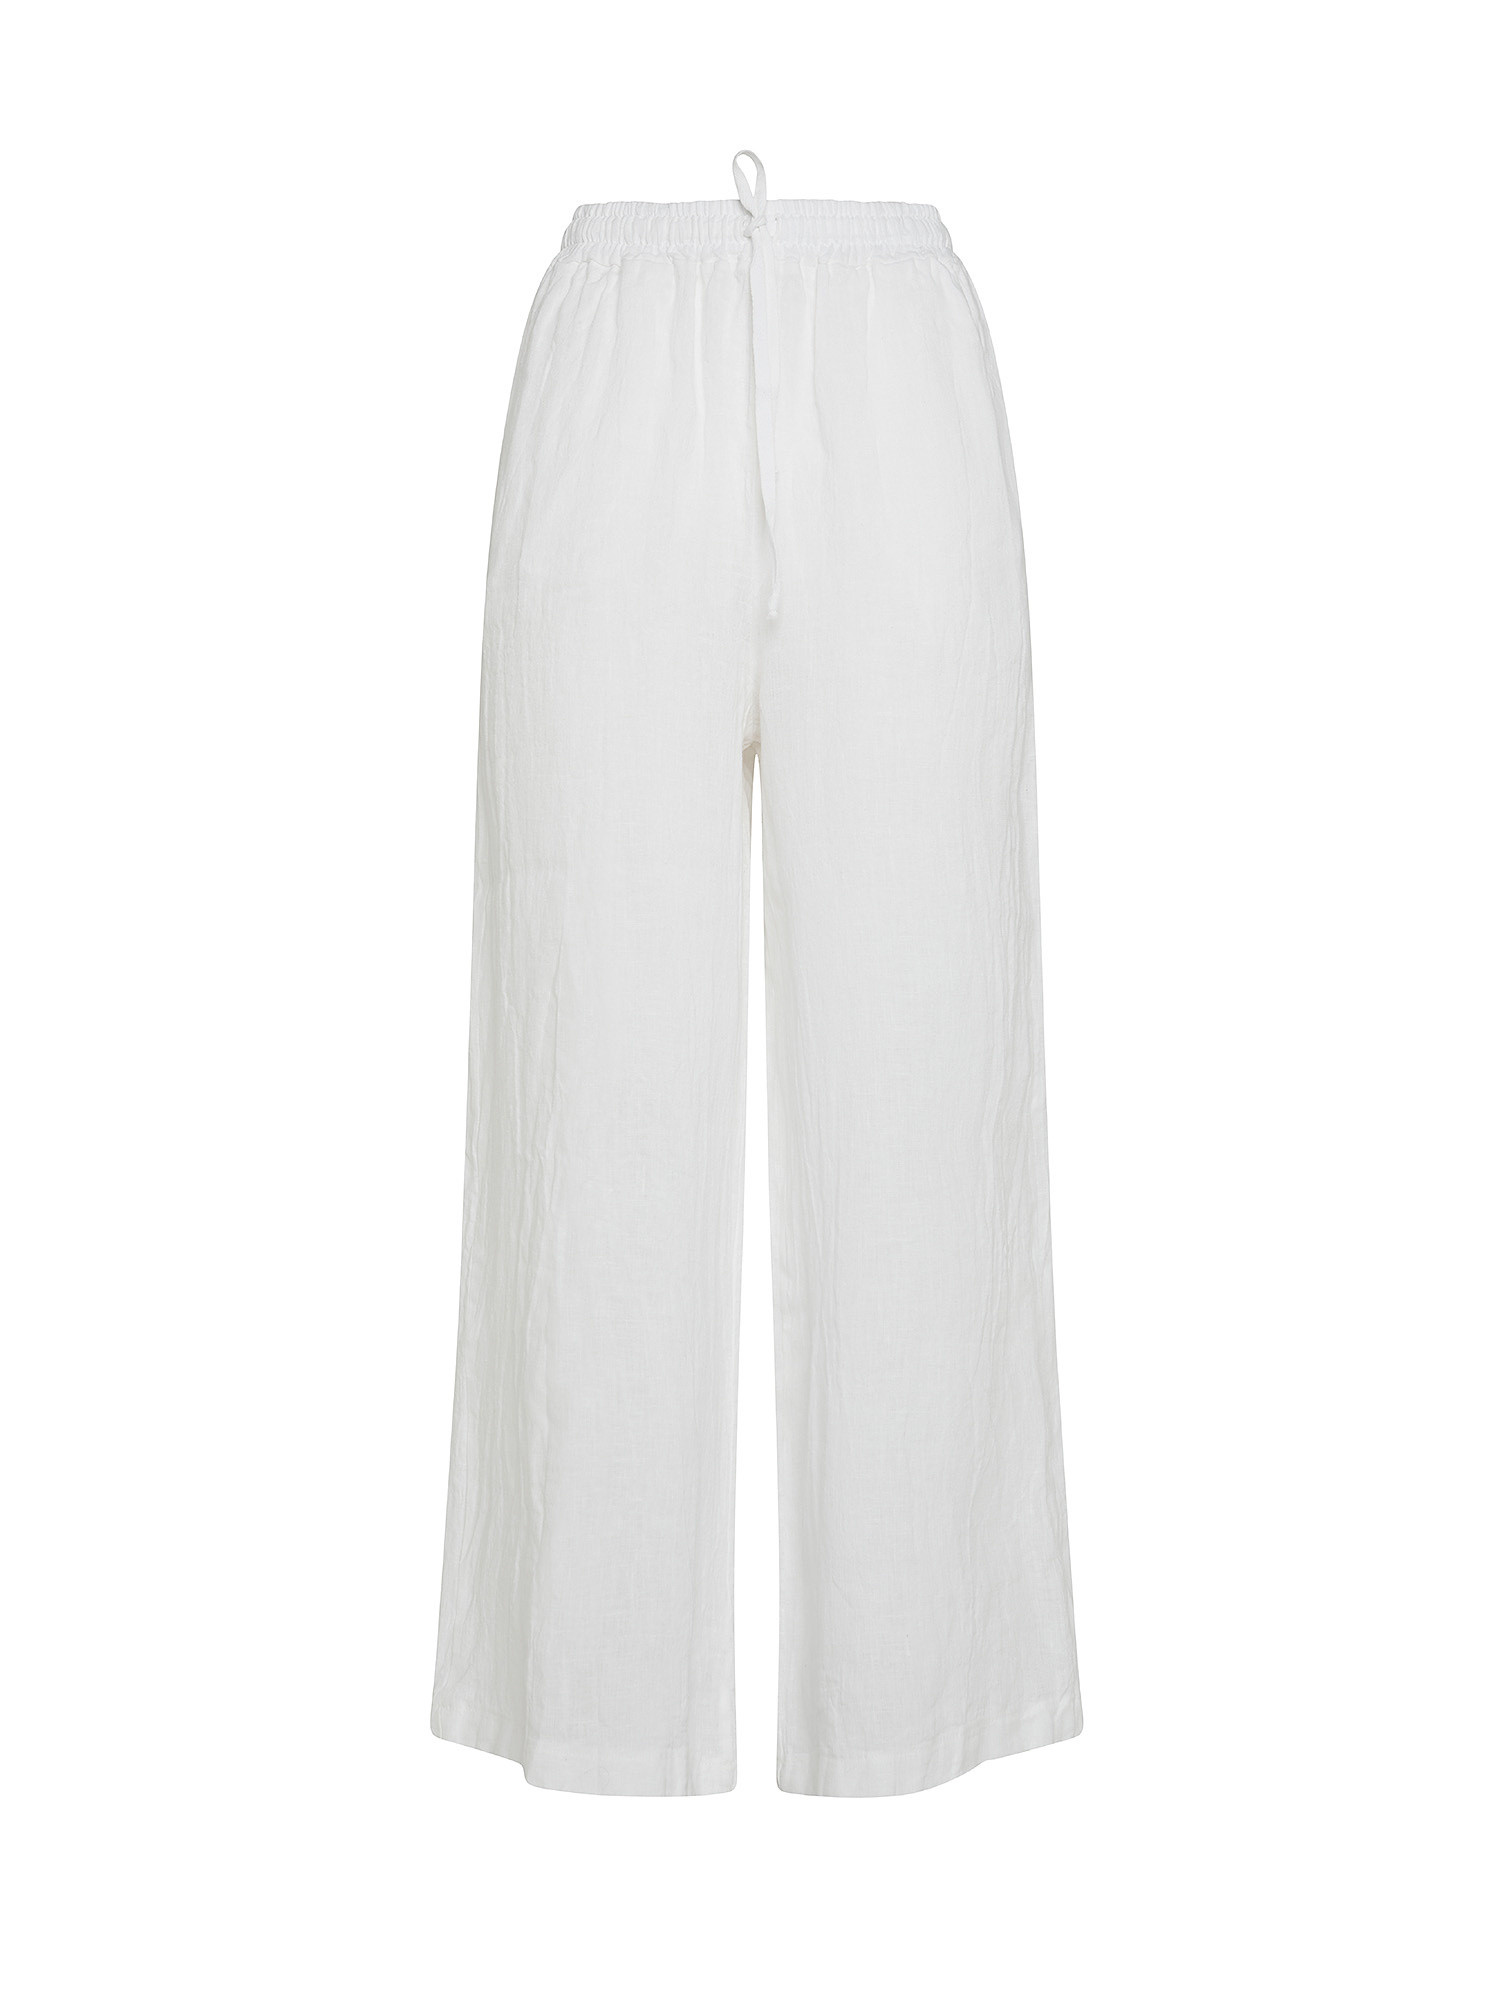 Solid color 100% linen trousers, White, large image number 0